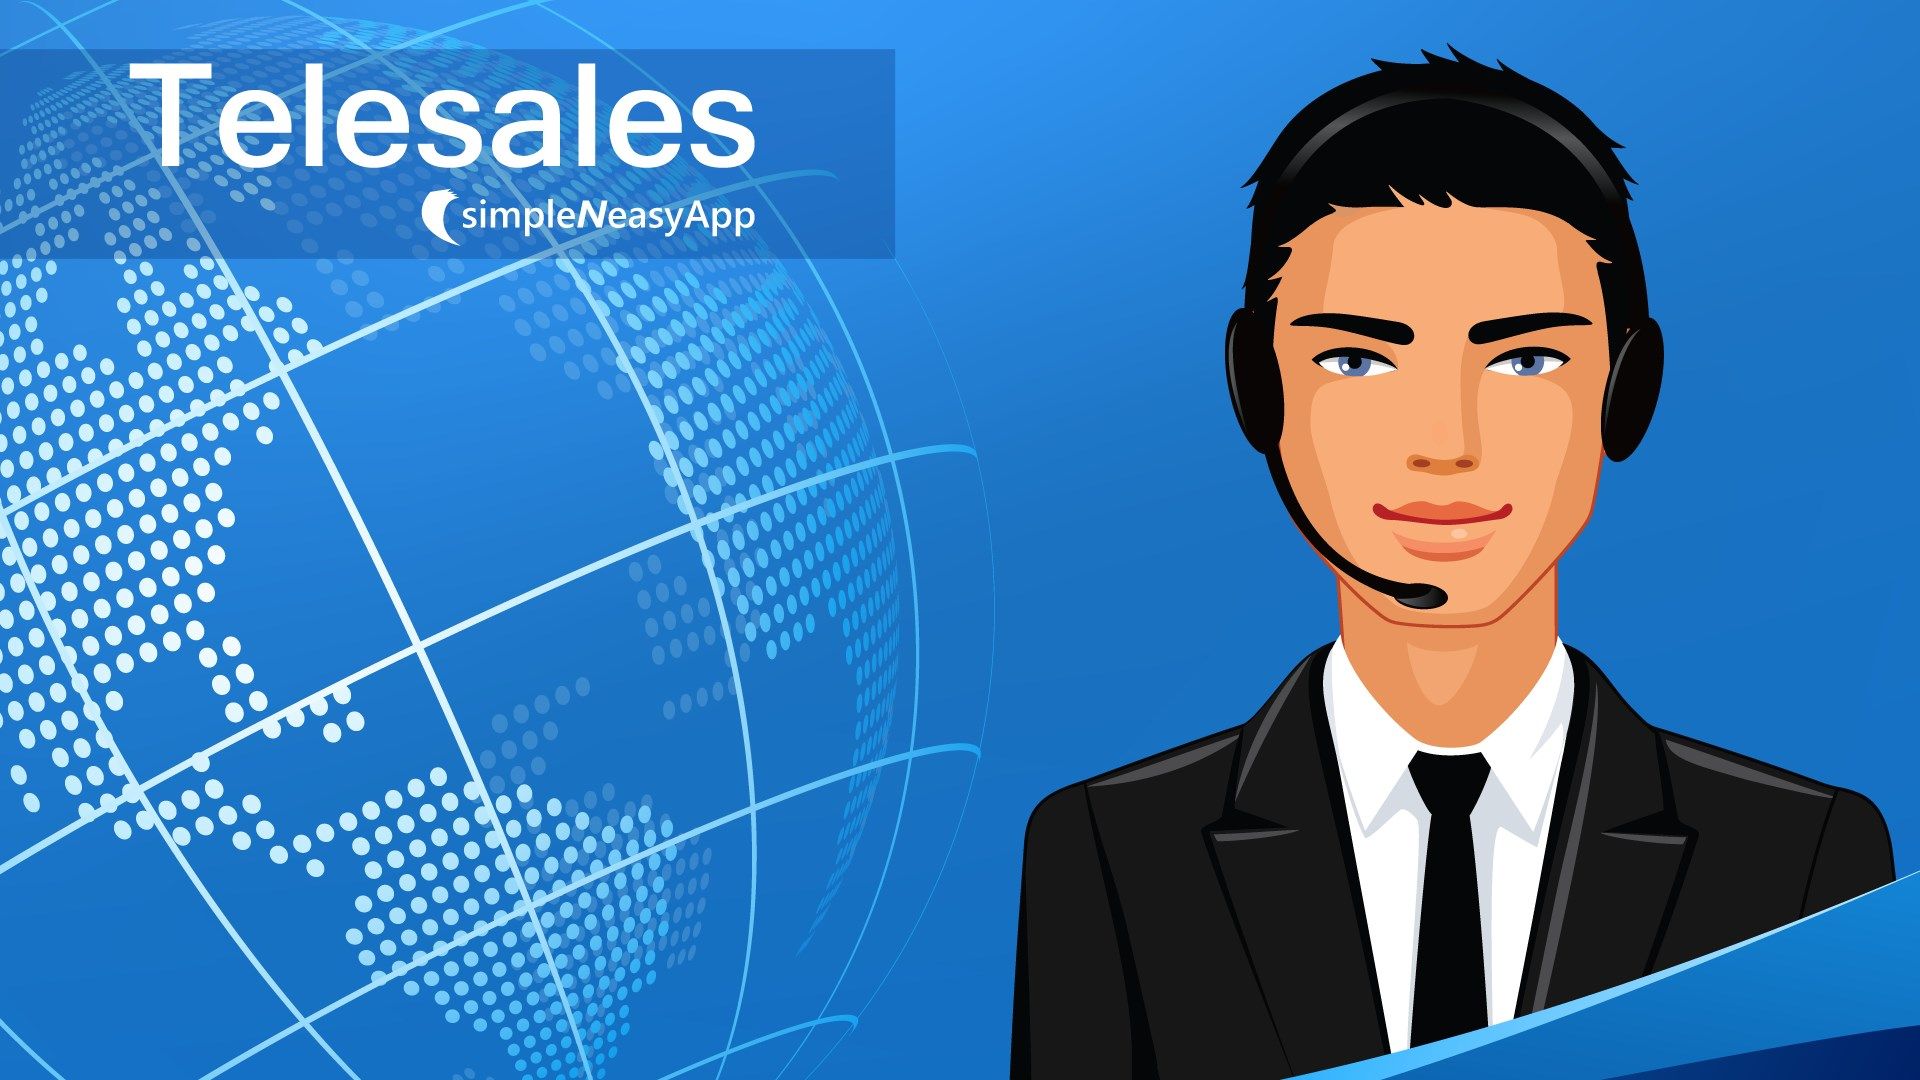 Using this app you can learn how to make an effective telesales call.